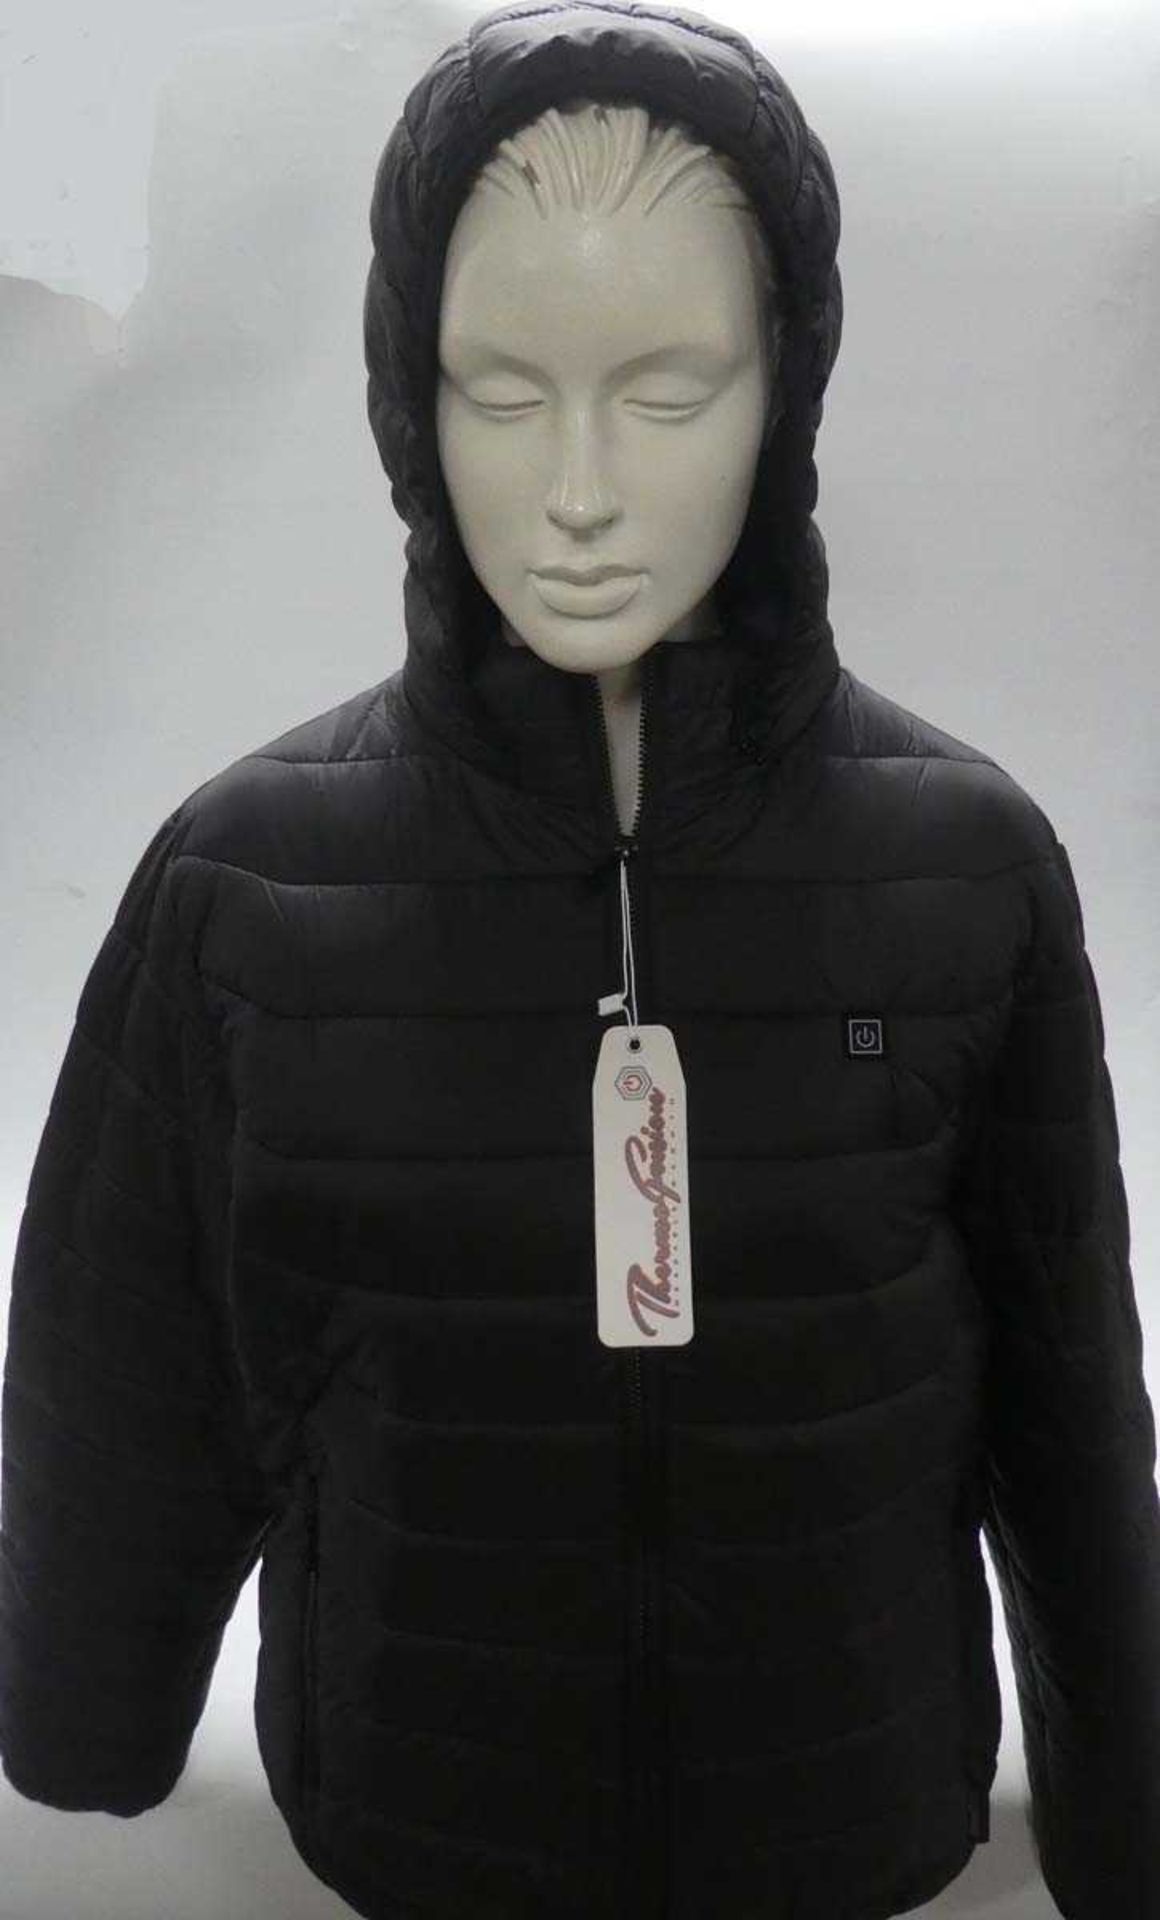 +VAT Thermofusion heated jacket with 5000mAh battery pack size small